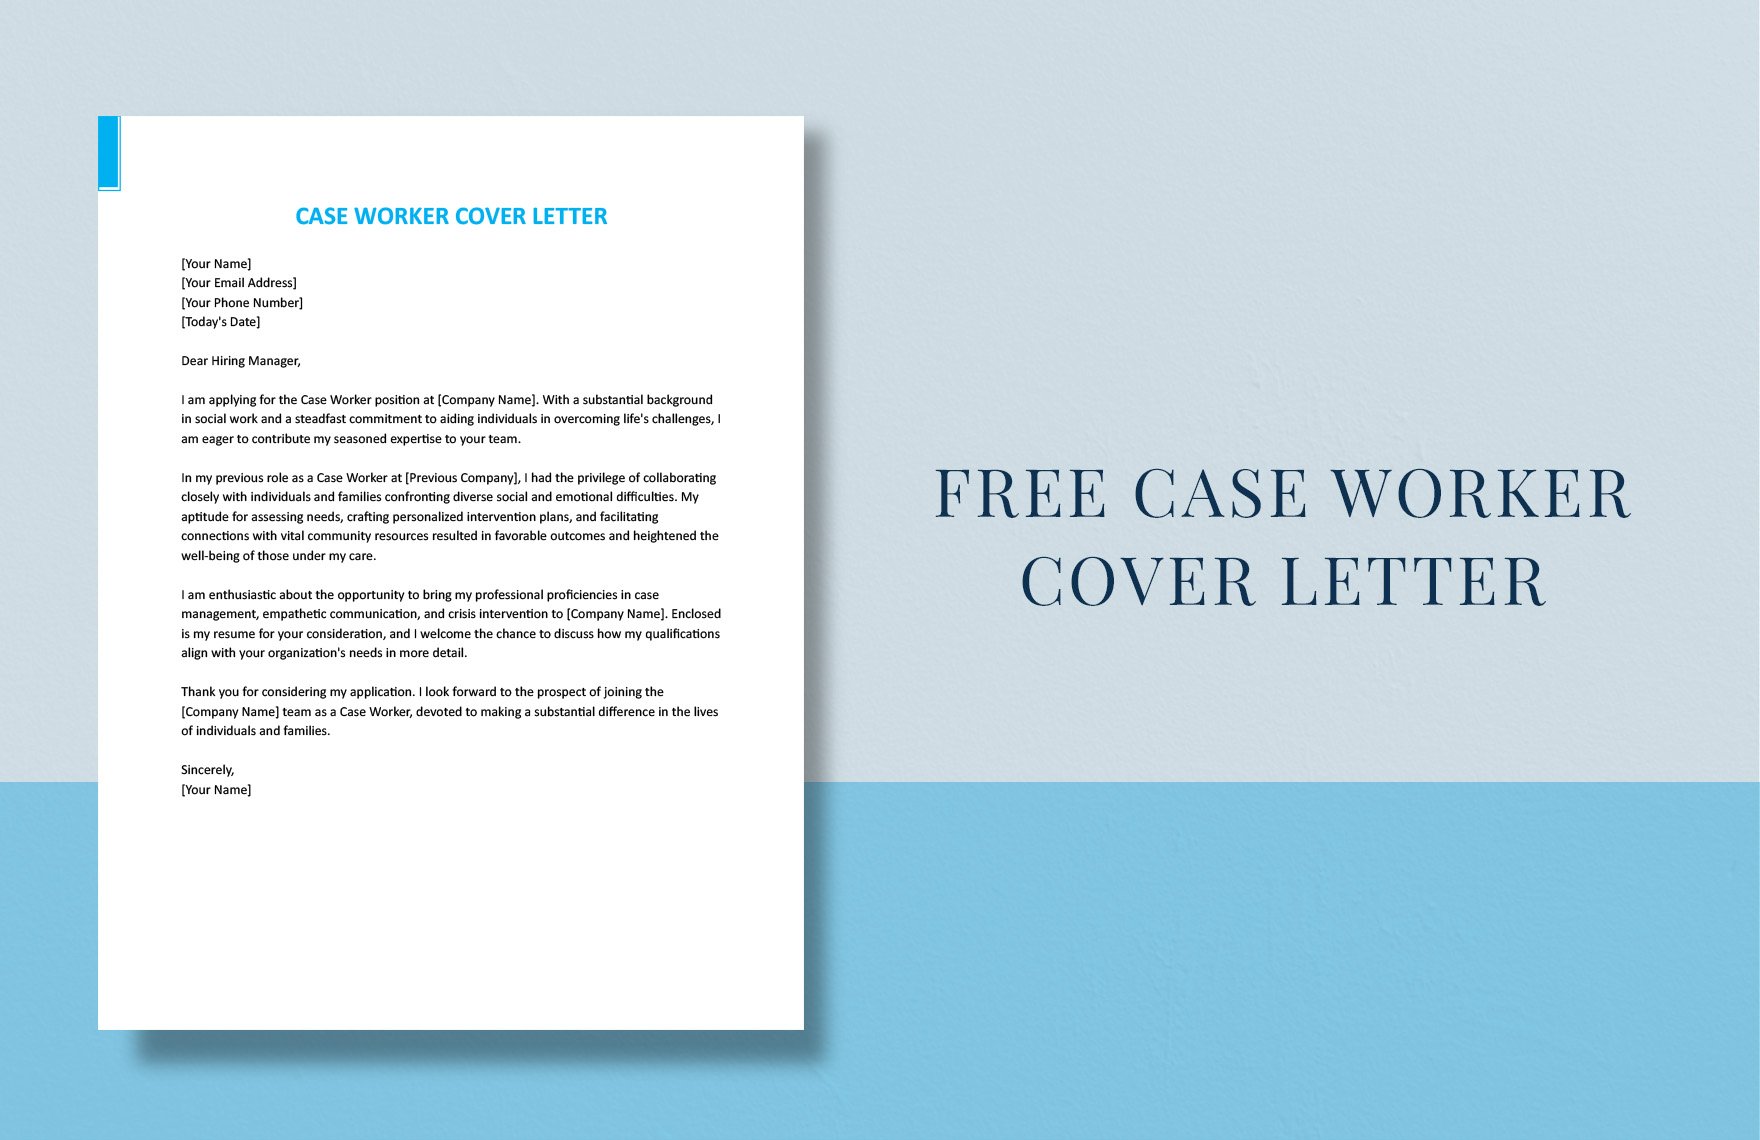 Case Worker Cover Letter in Word, Google Docs